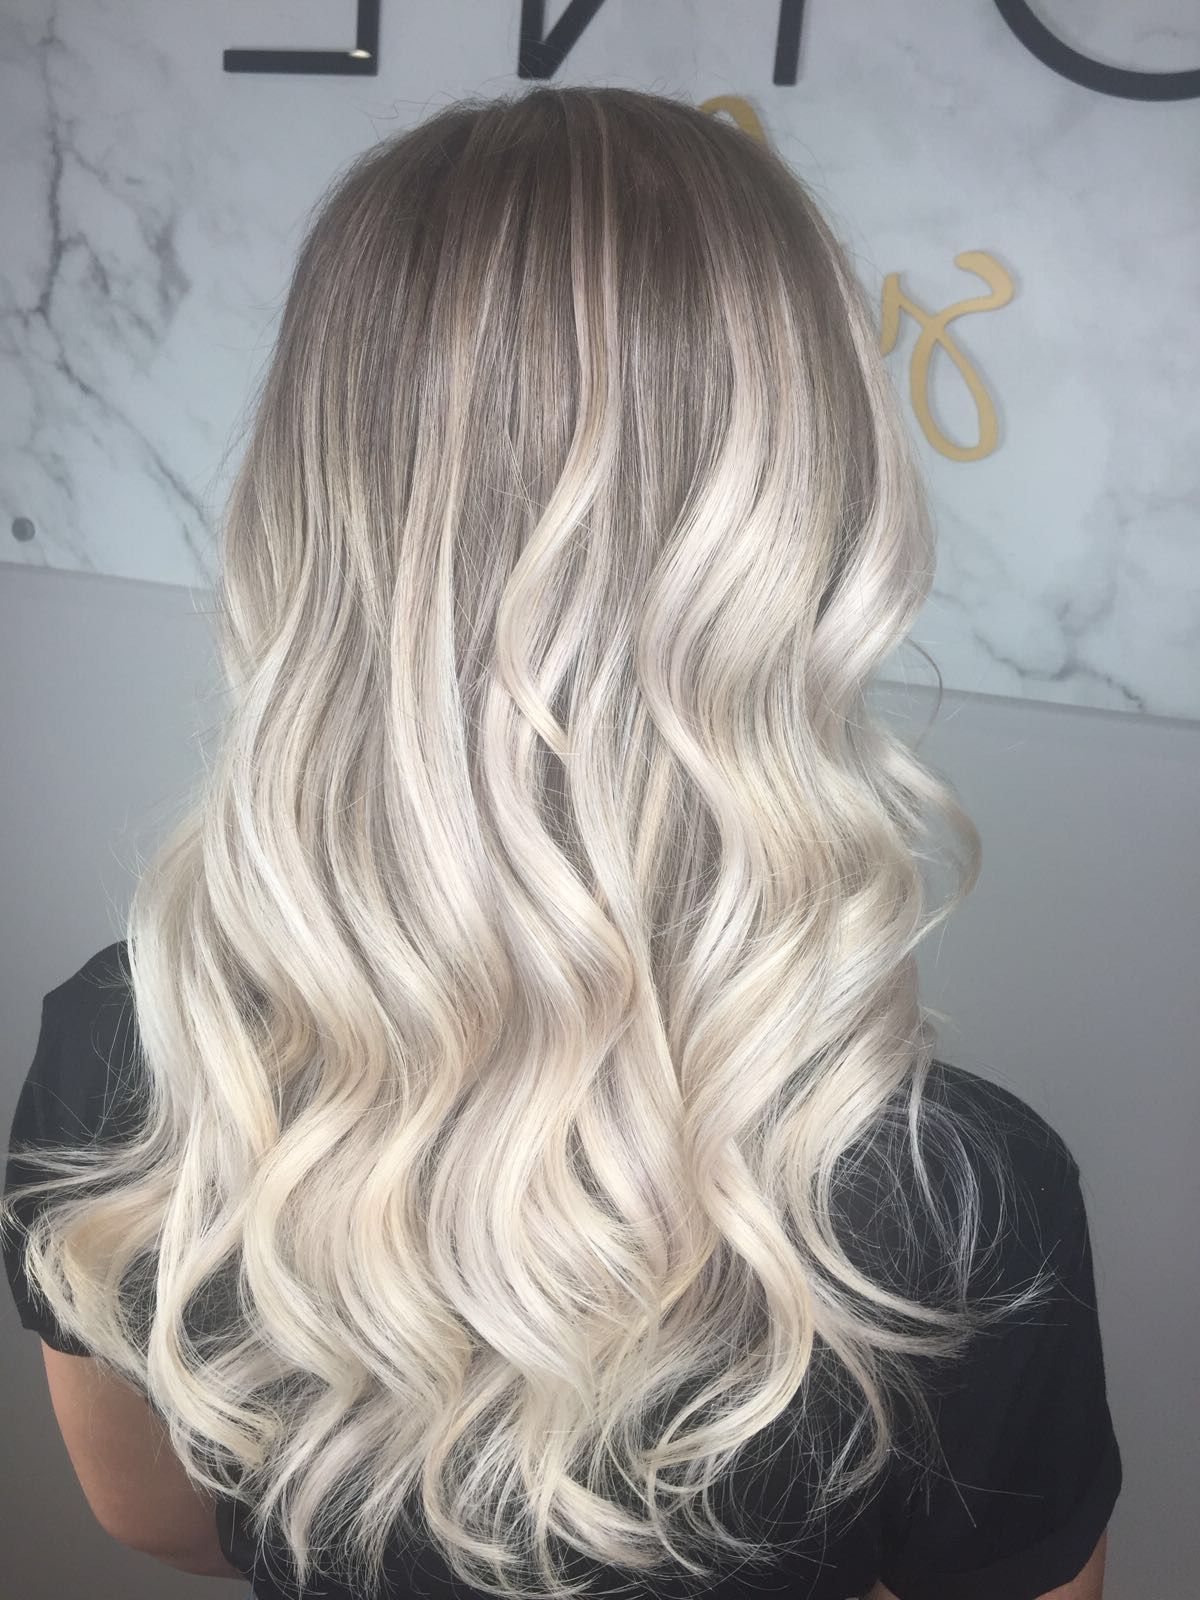 Current Long Dark Hairstyles With Blonde Contour Balayage Inside Ash Blonde Balayage Perth Hair Slaon (Gallery 20 of 20)